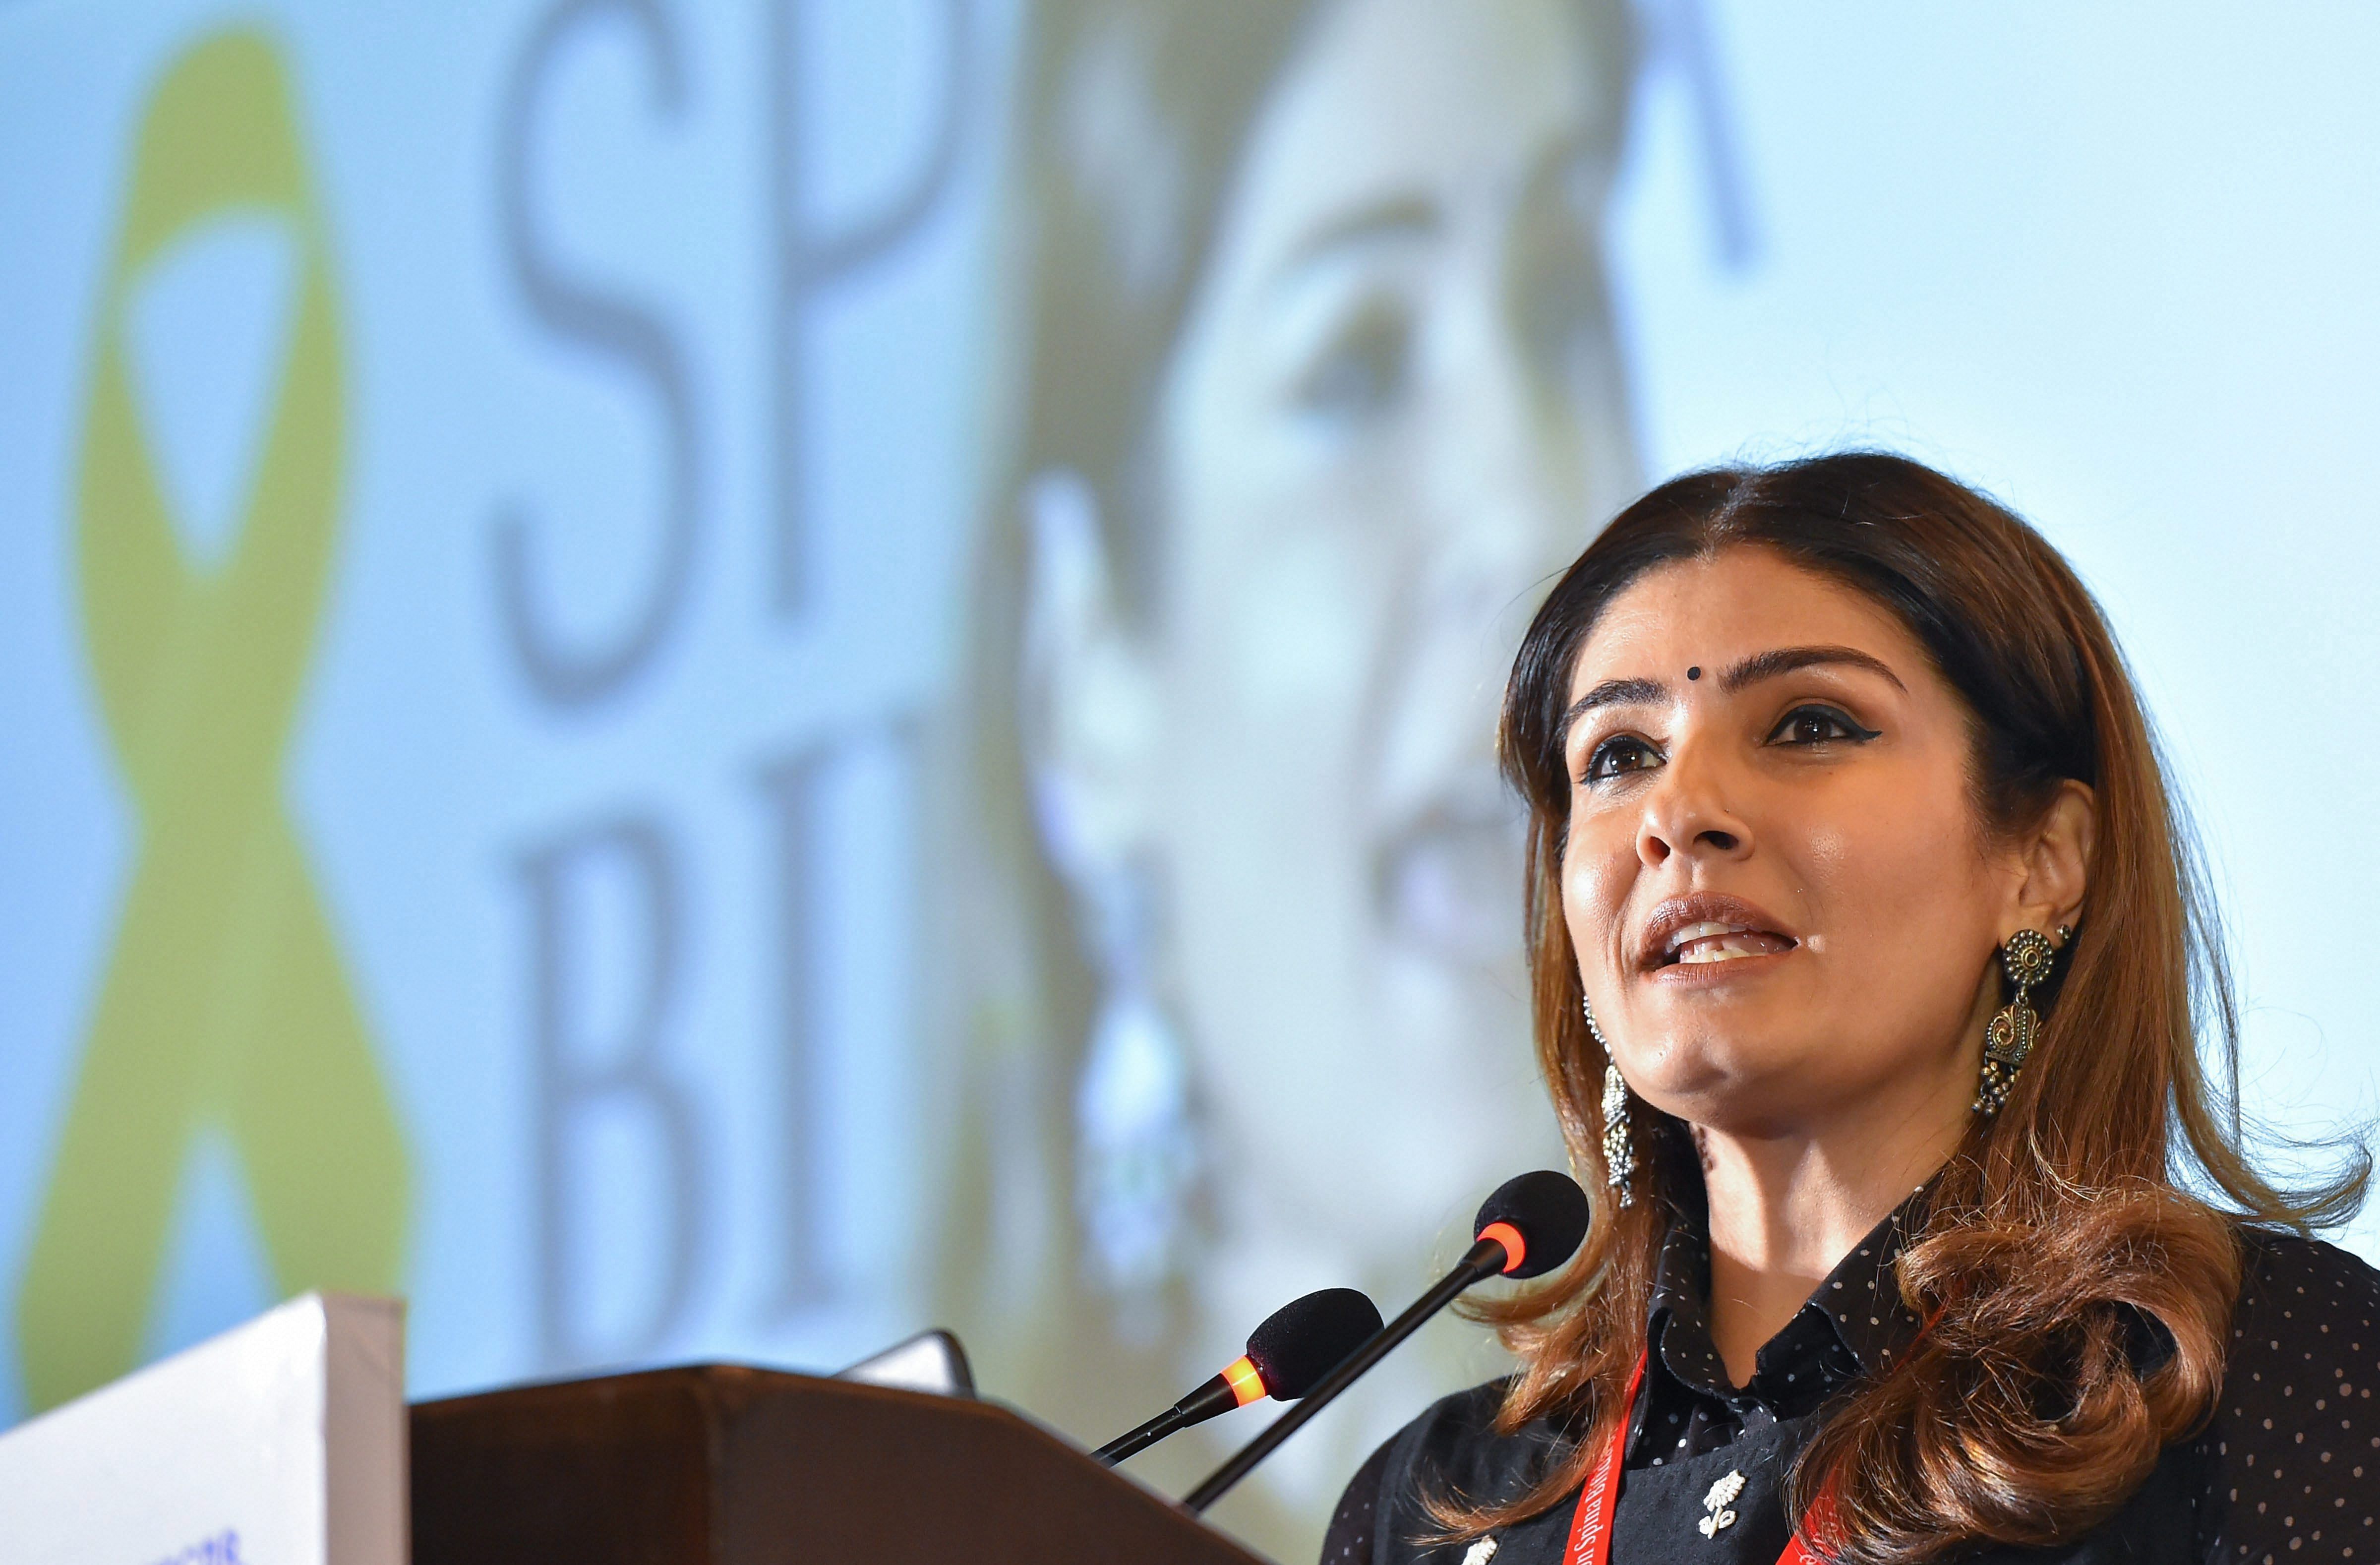 Bollywood actress Raveena Tandon speaks during the inauguration of the 28th International Conference on Spina Bifida and Hydrocephalus in New Delhi. (PTI Photo)